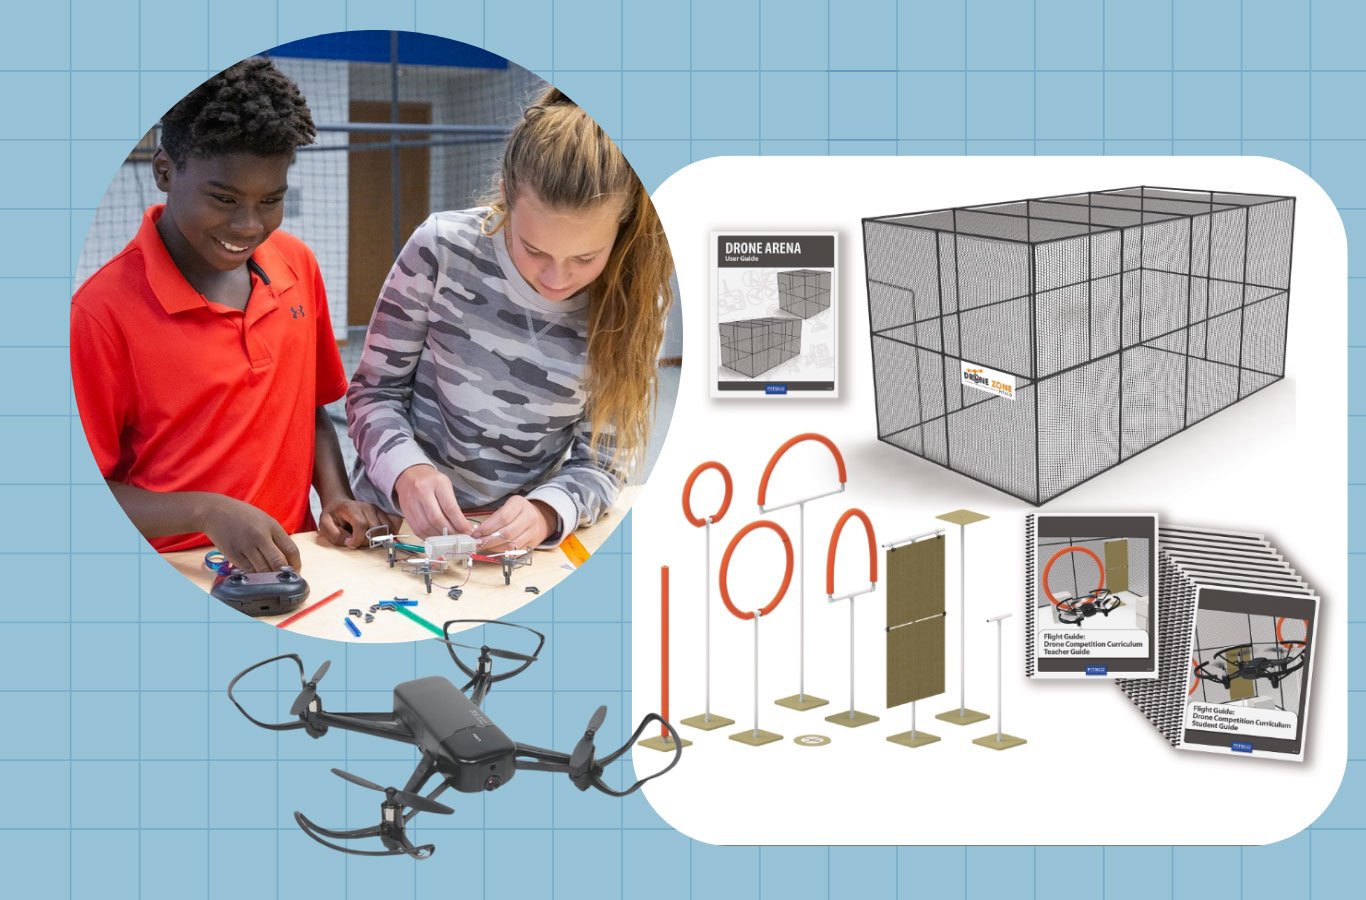 Boy and girl working to assemble a drone with the drone course curriculum featured